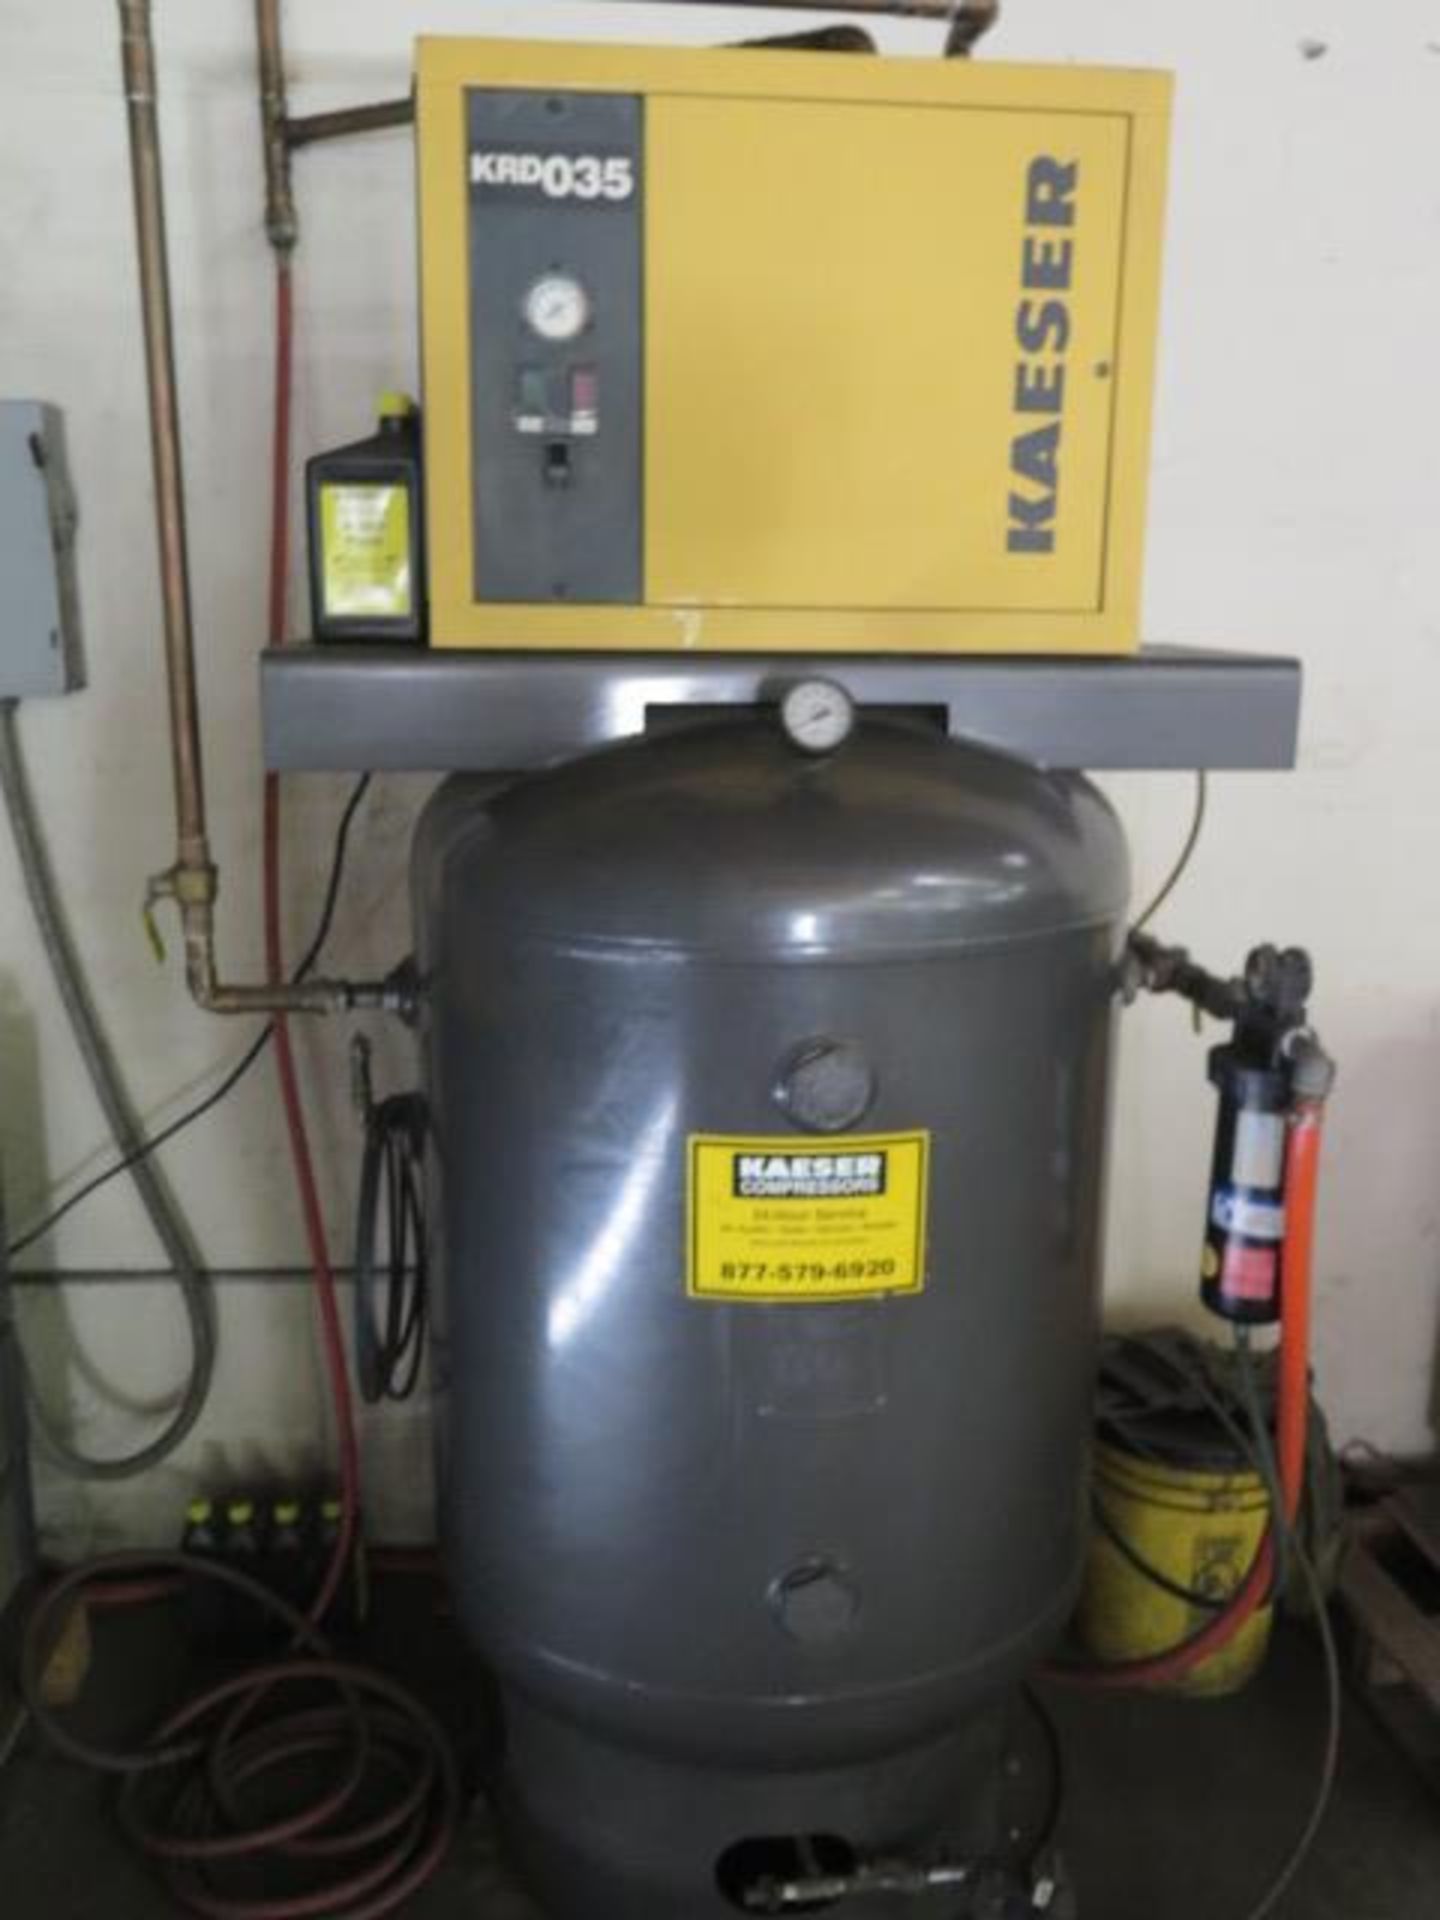 2006 Kaeser SM11 10Hp Rotary Air Compressor s/n 1220 w/ Dig Controls, 42 CFM @ 110 PSIG31,SOLD AS IS - Image 10 of 15